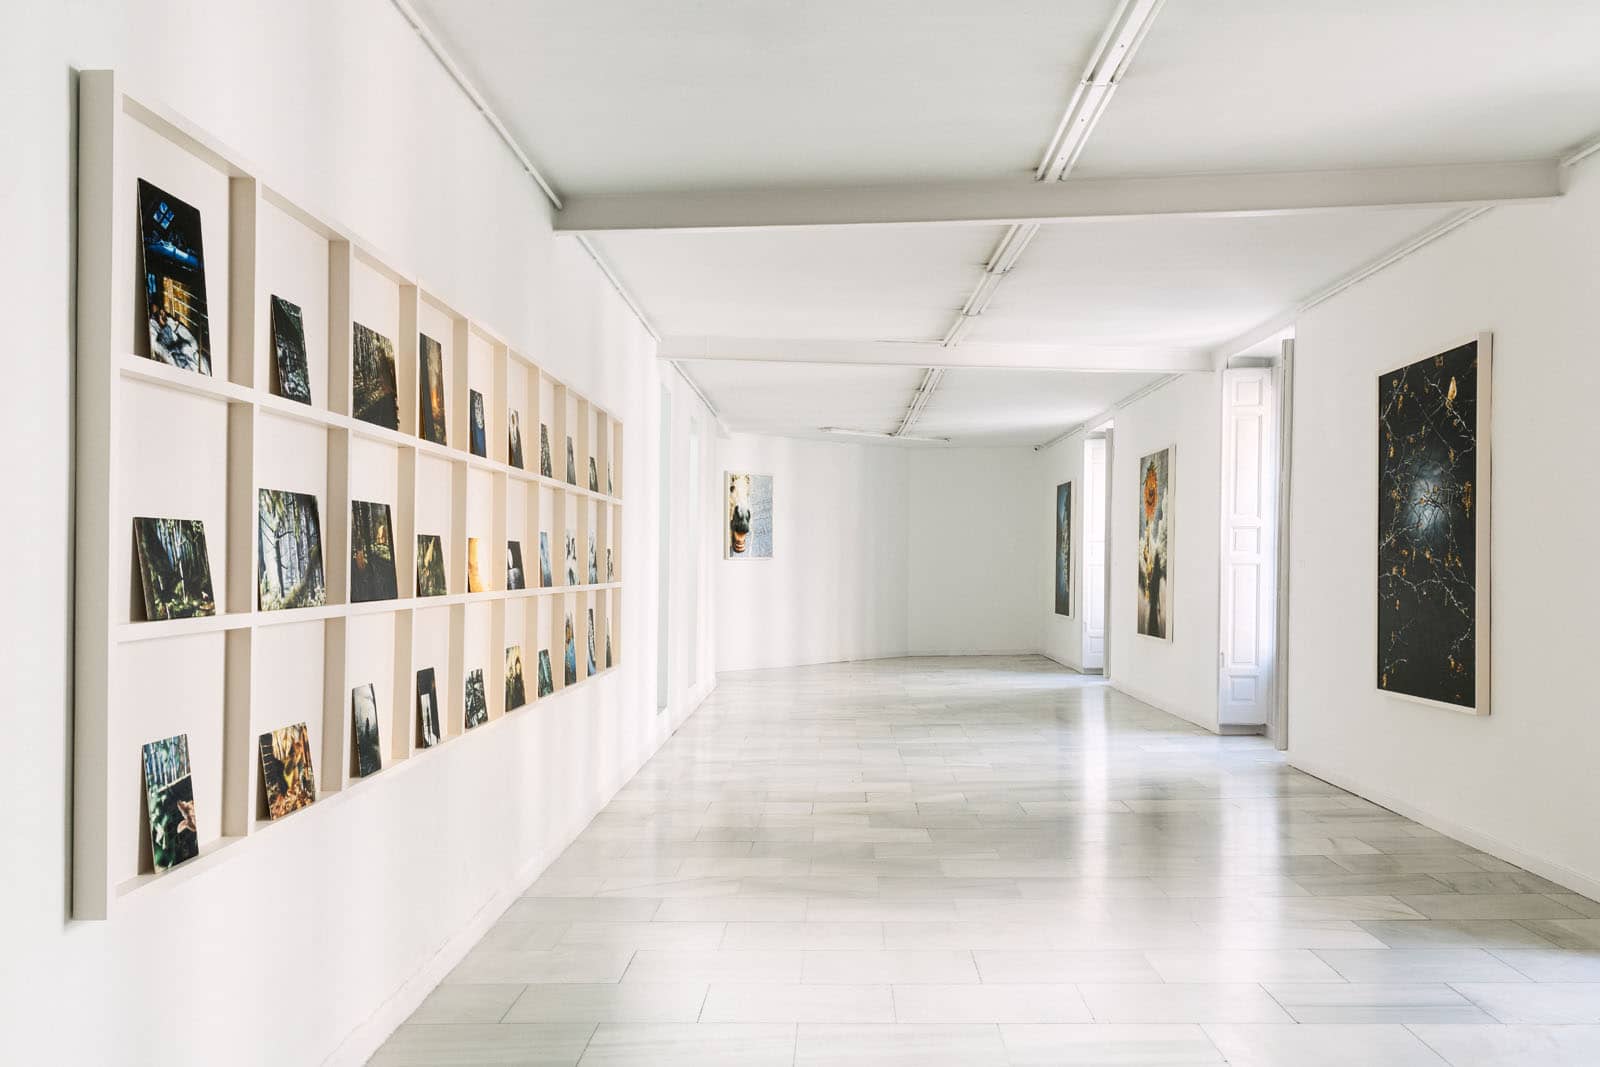 Exhibition view of the solo show "Falada" by Philipp Fröhlich at Juana de Aizpuru gallery in Spain, 2022. The image shows various oil paintings at the gallery space.